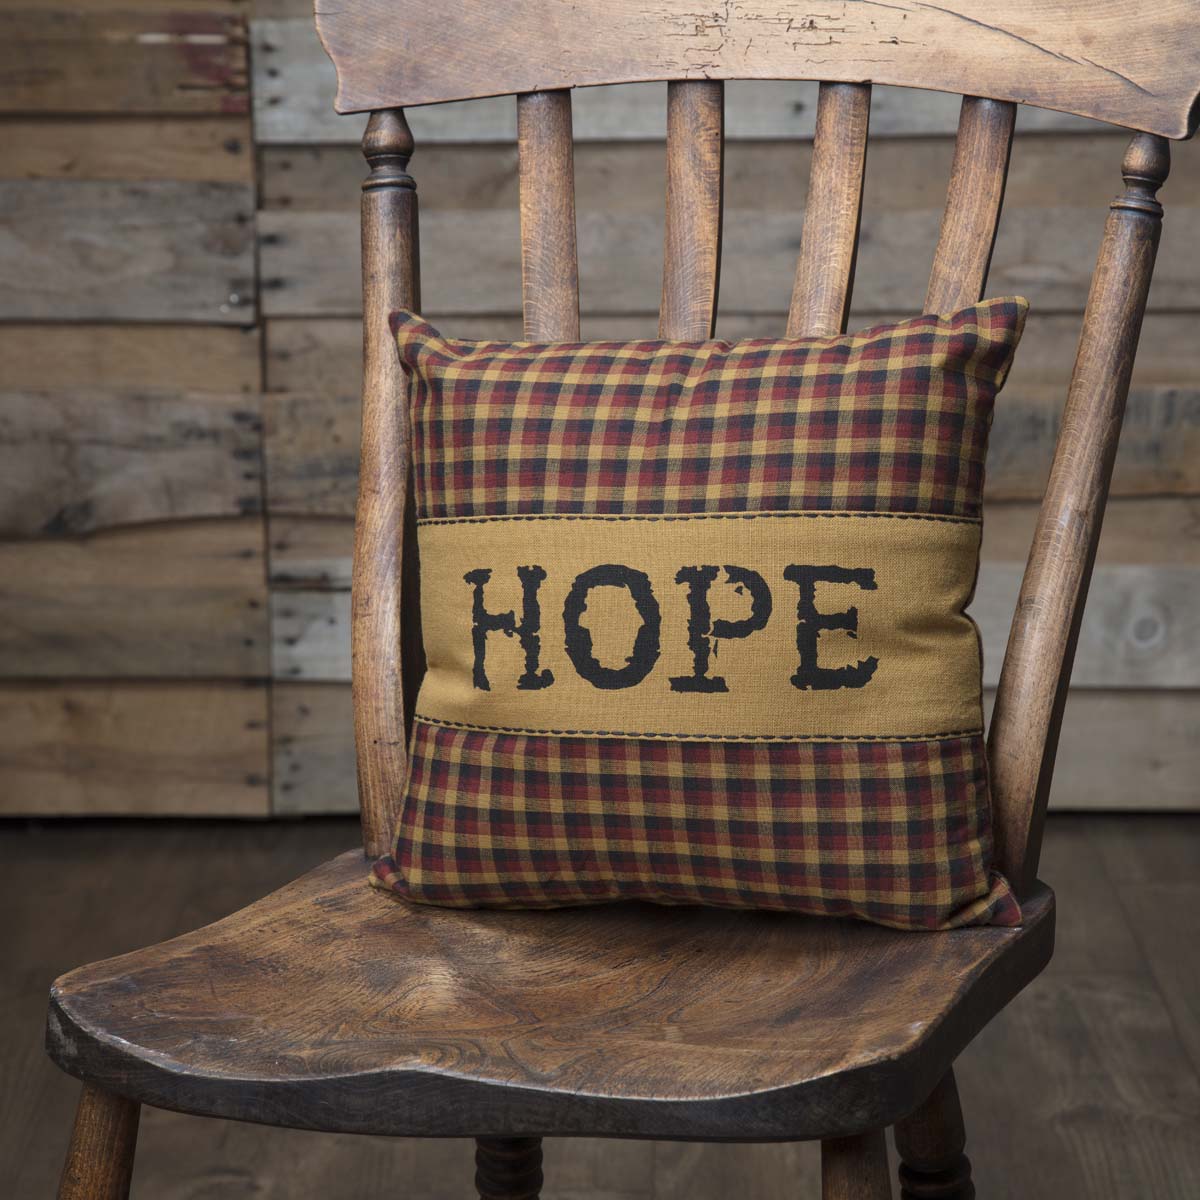 34299-Heritage-Farms-Hope-Pillow-12x12-image-5